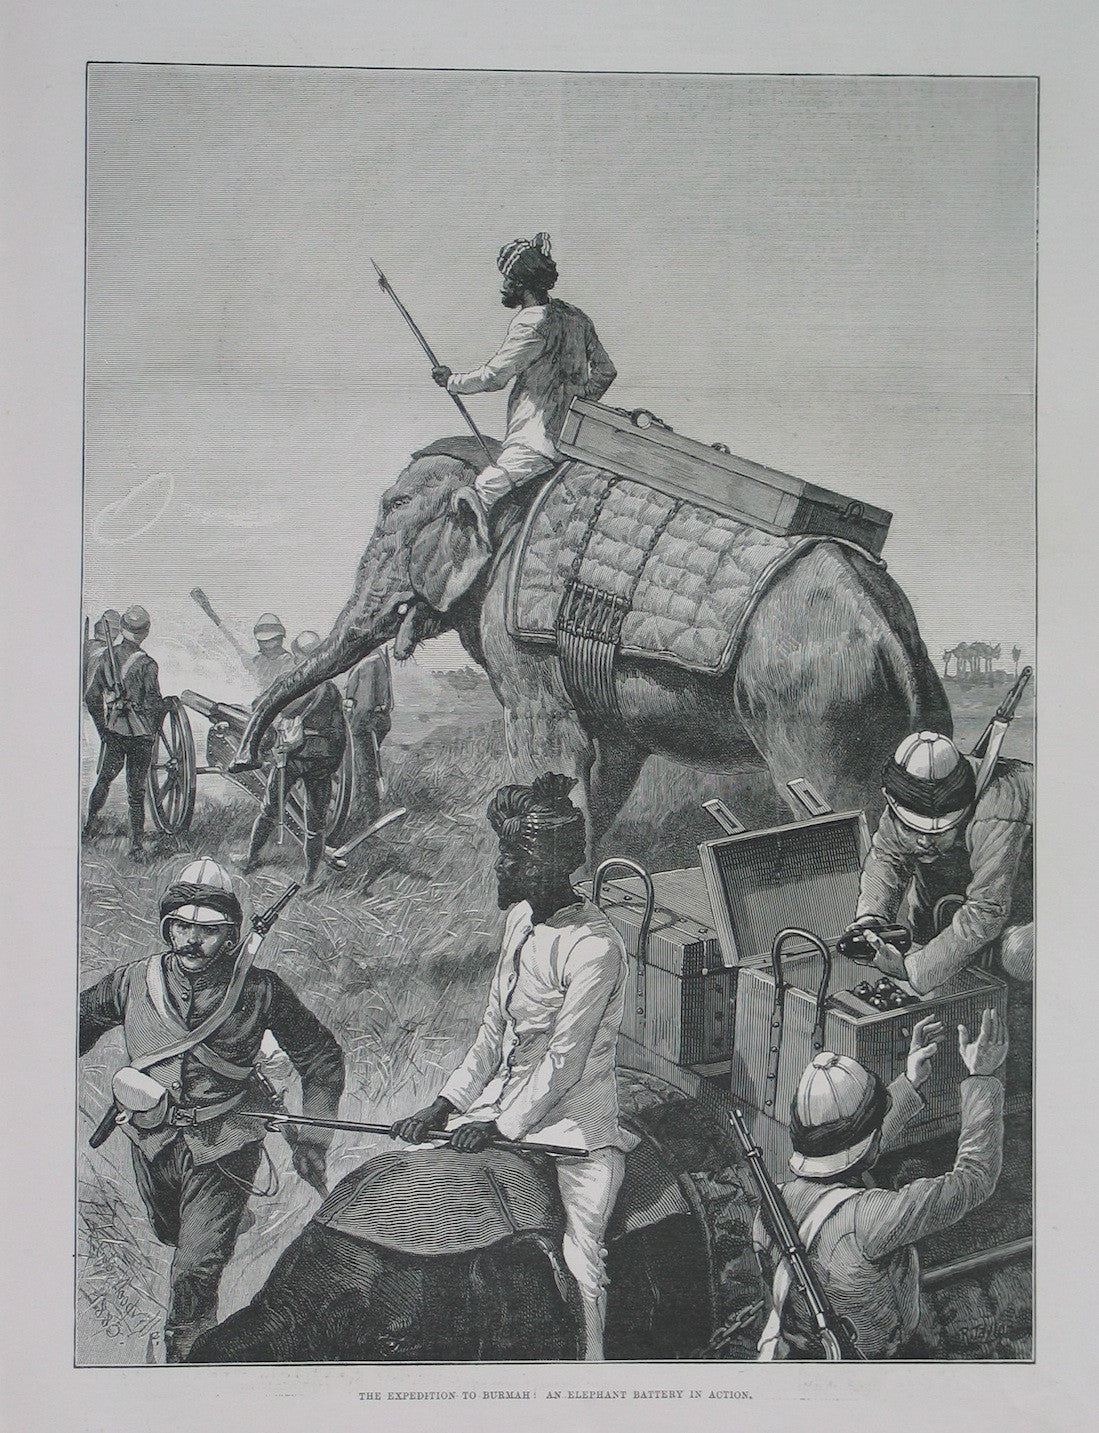 The Expedition to Burmah(sic) : An elephant battery in action.